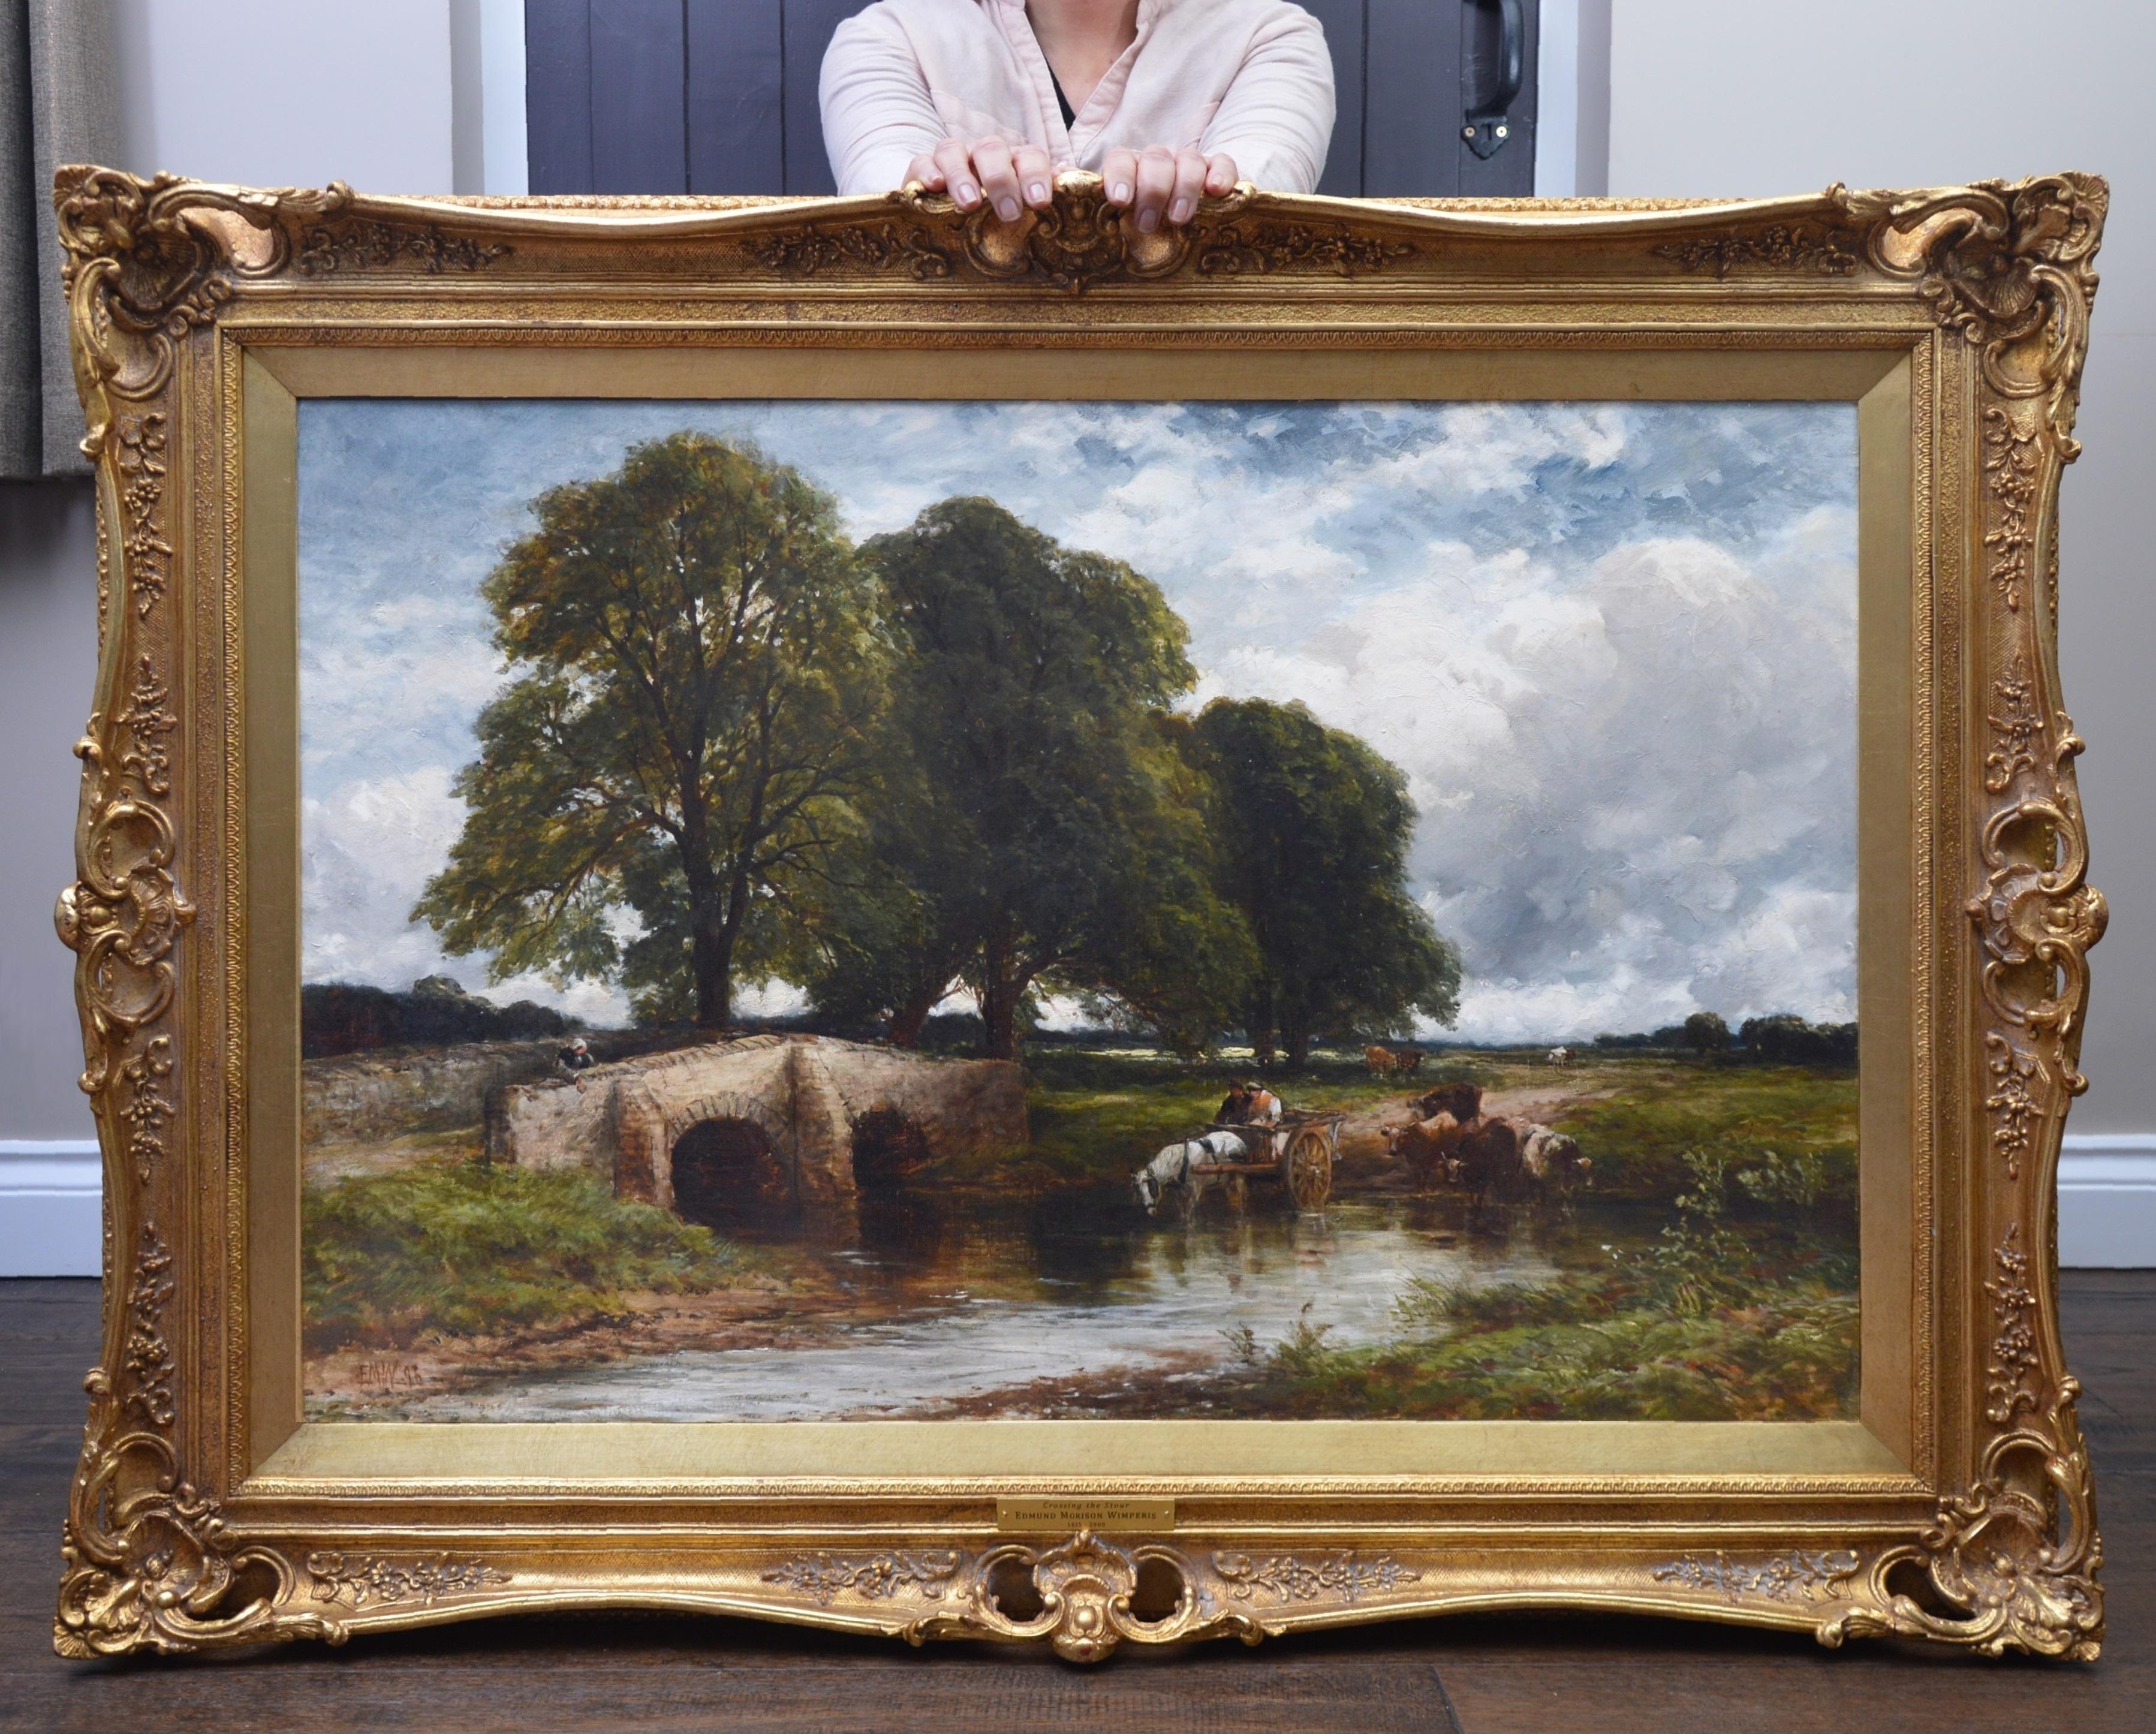 Crossing the Stour - Large 19th Century English Landscape Oil Painting   - Brown Animal Painting by Edmund Wimperis